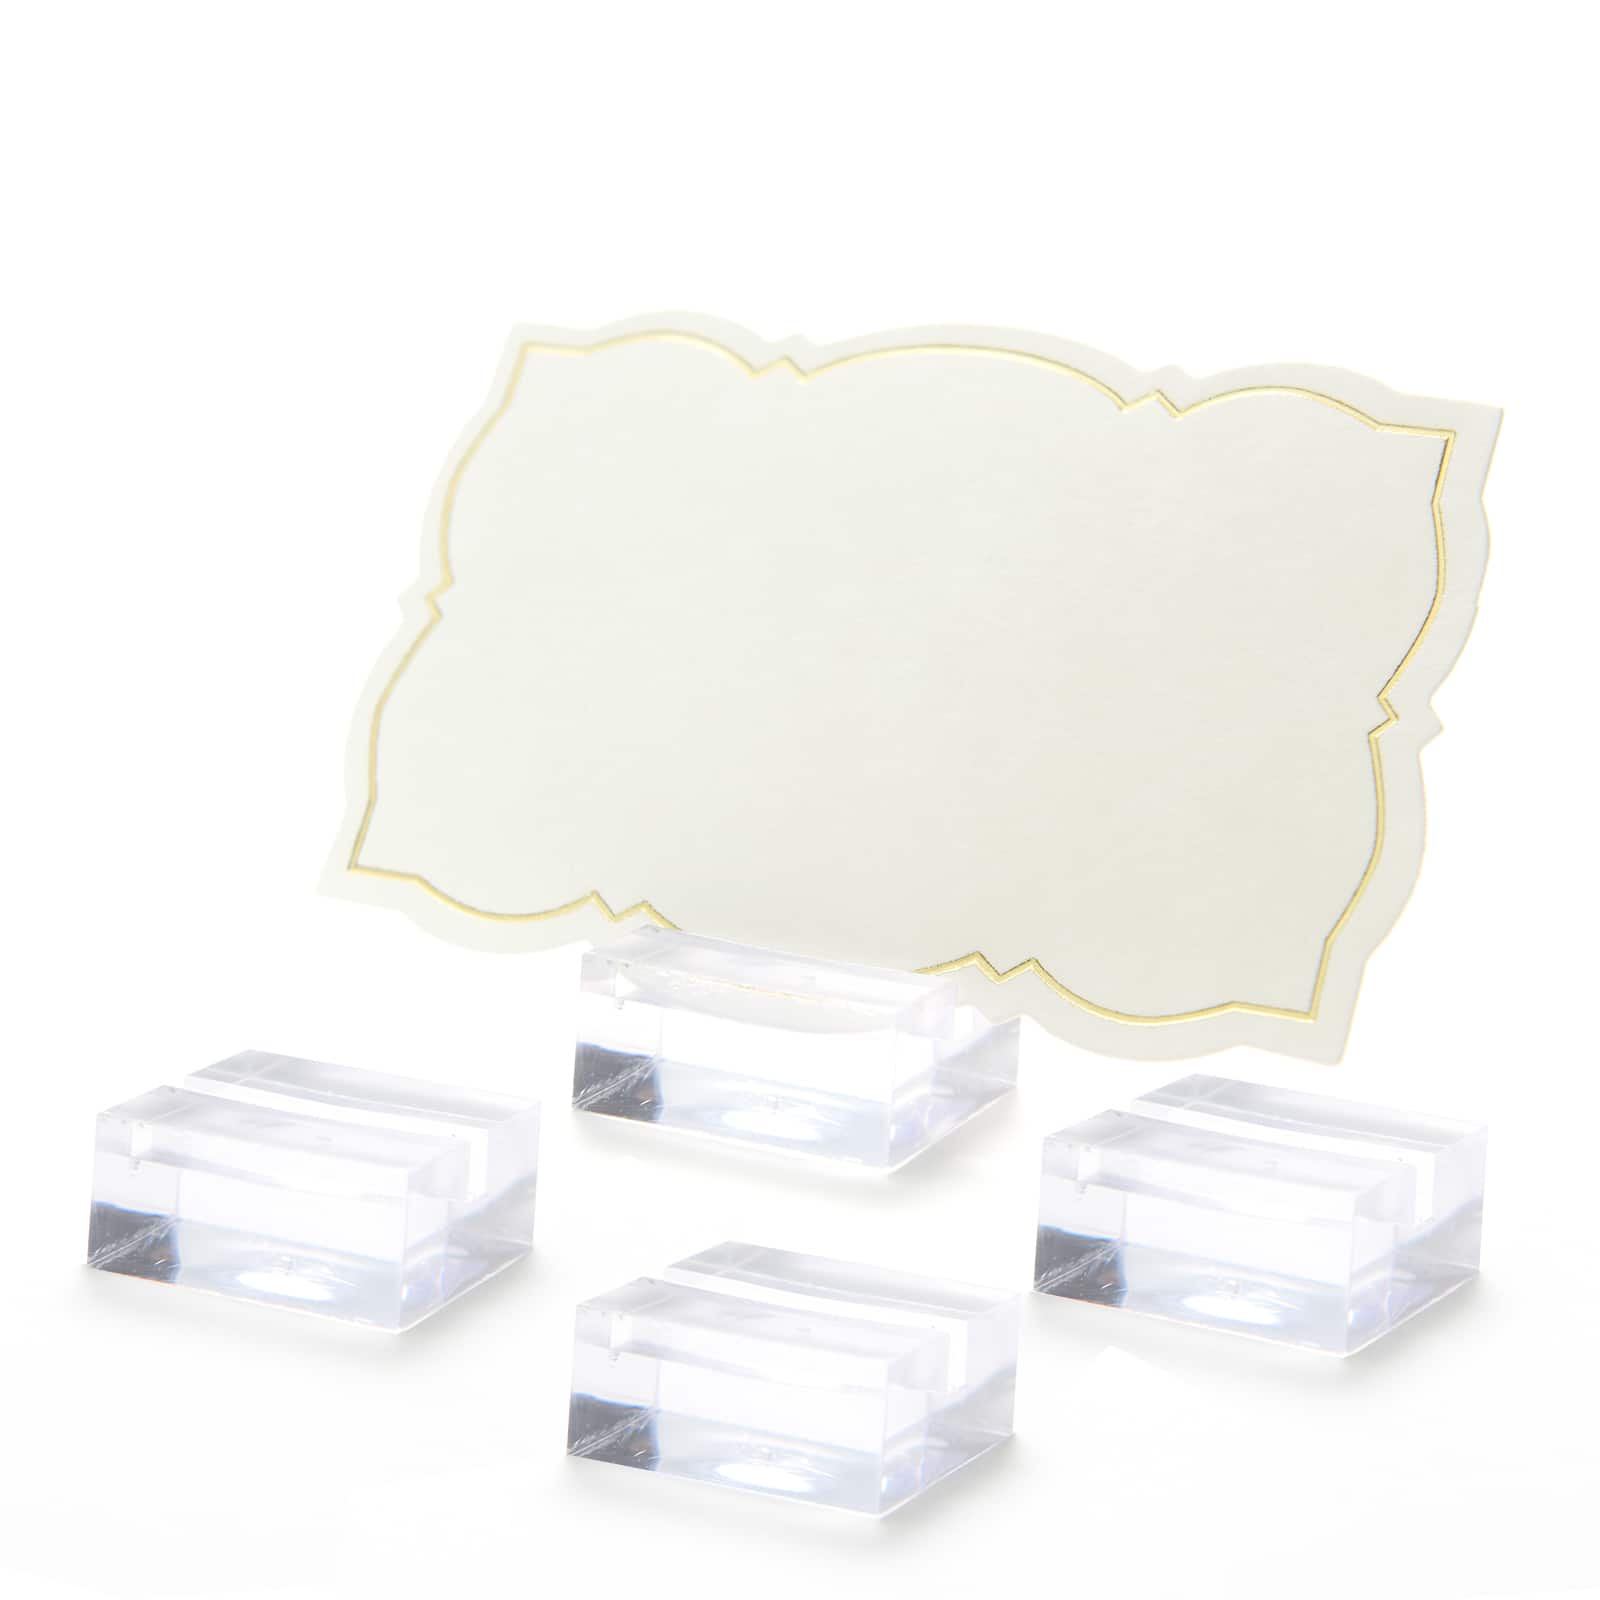 6 Packs: 12 ct. (72 total) Style Me Pretty Clear Place Card Holders